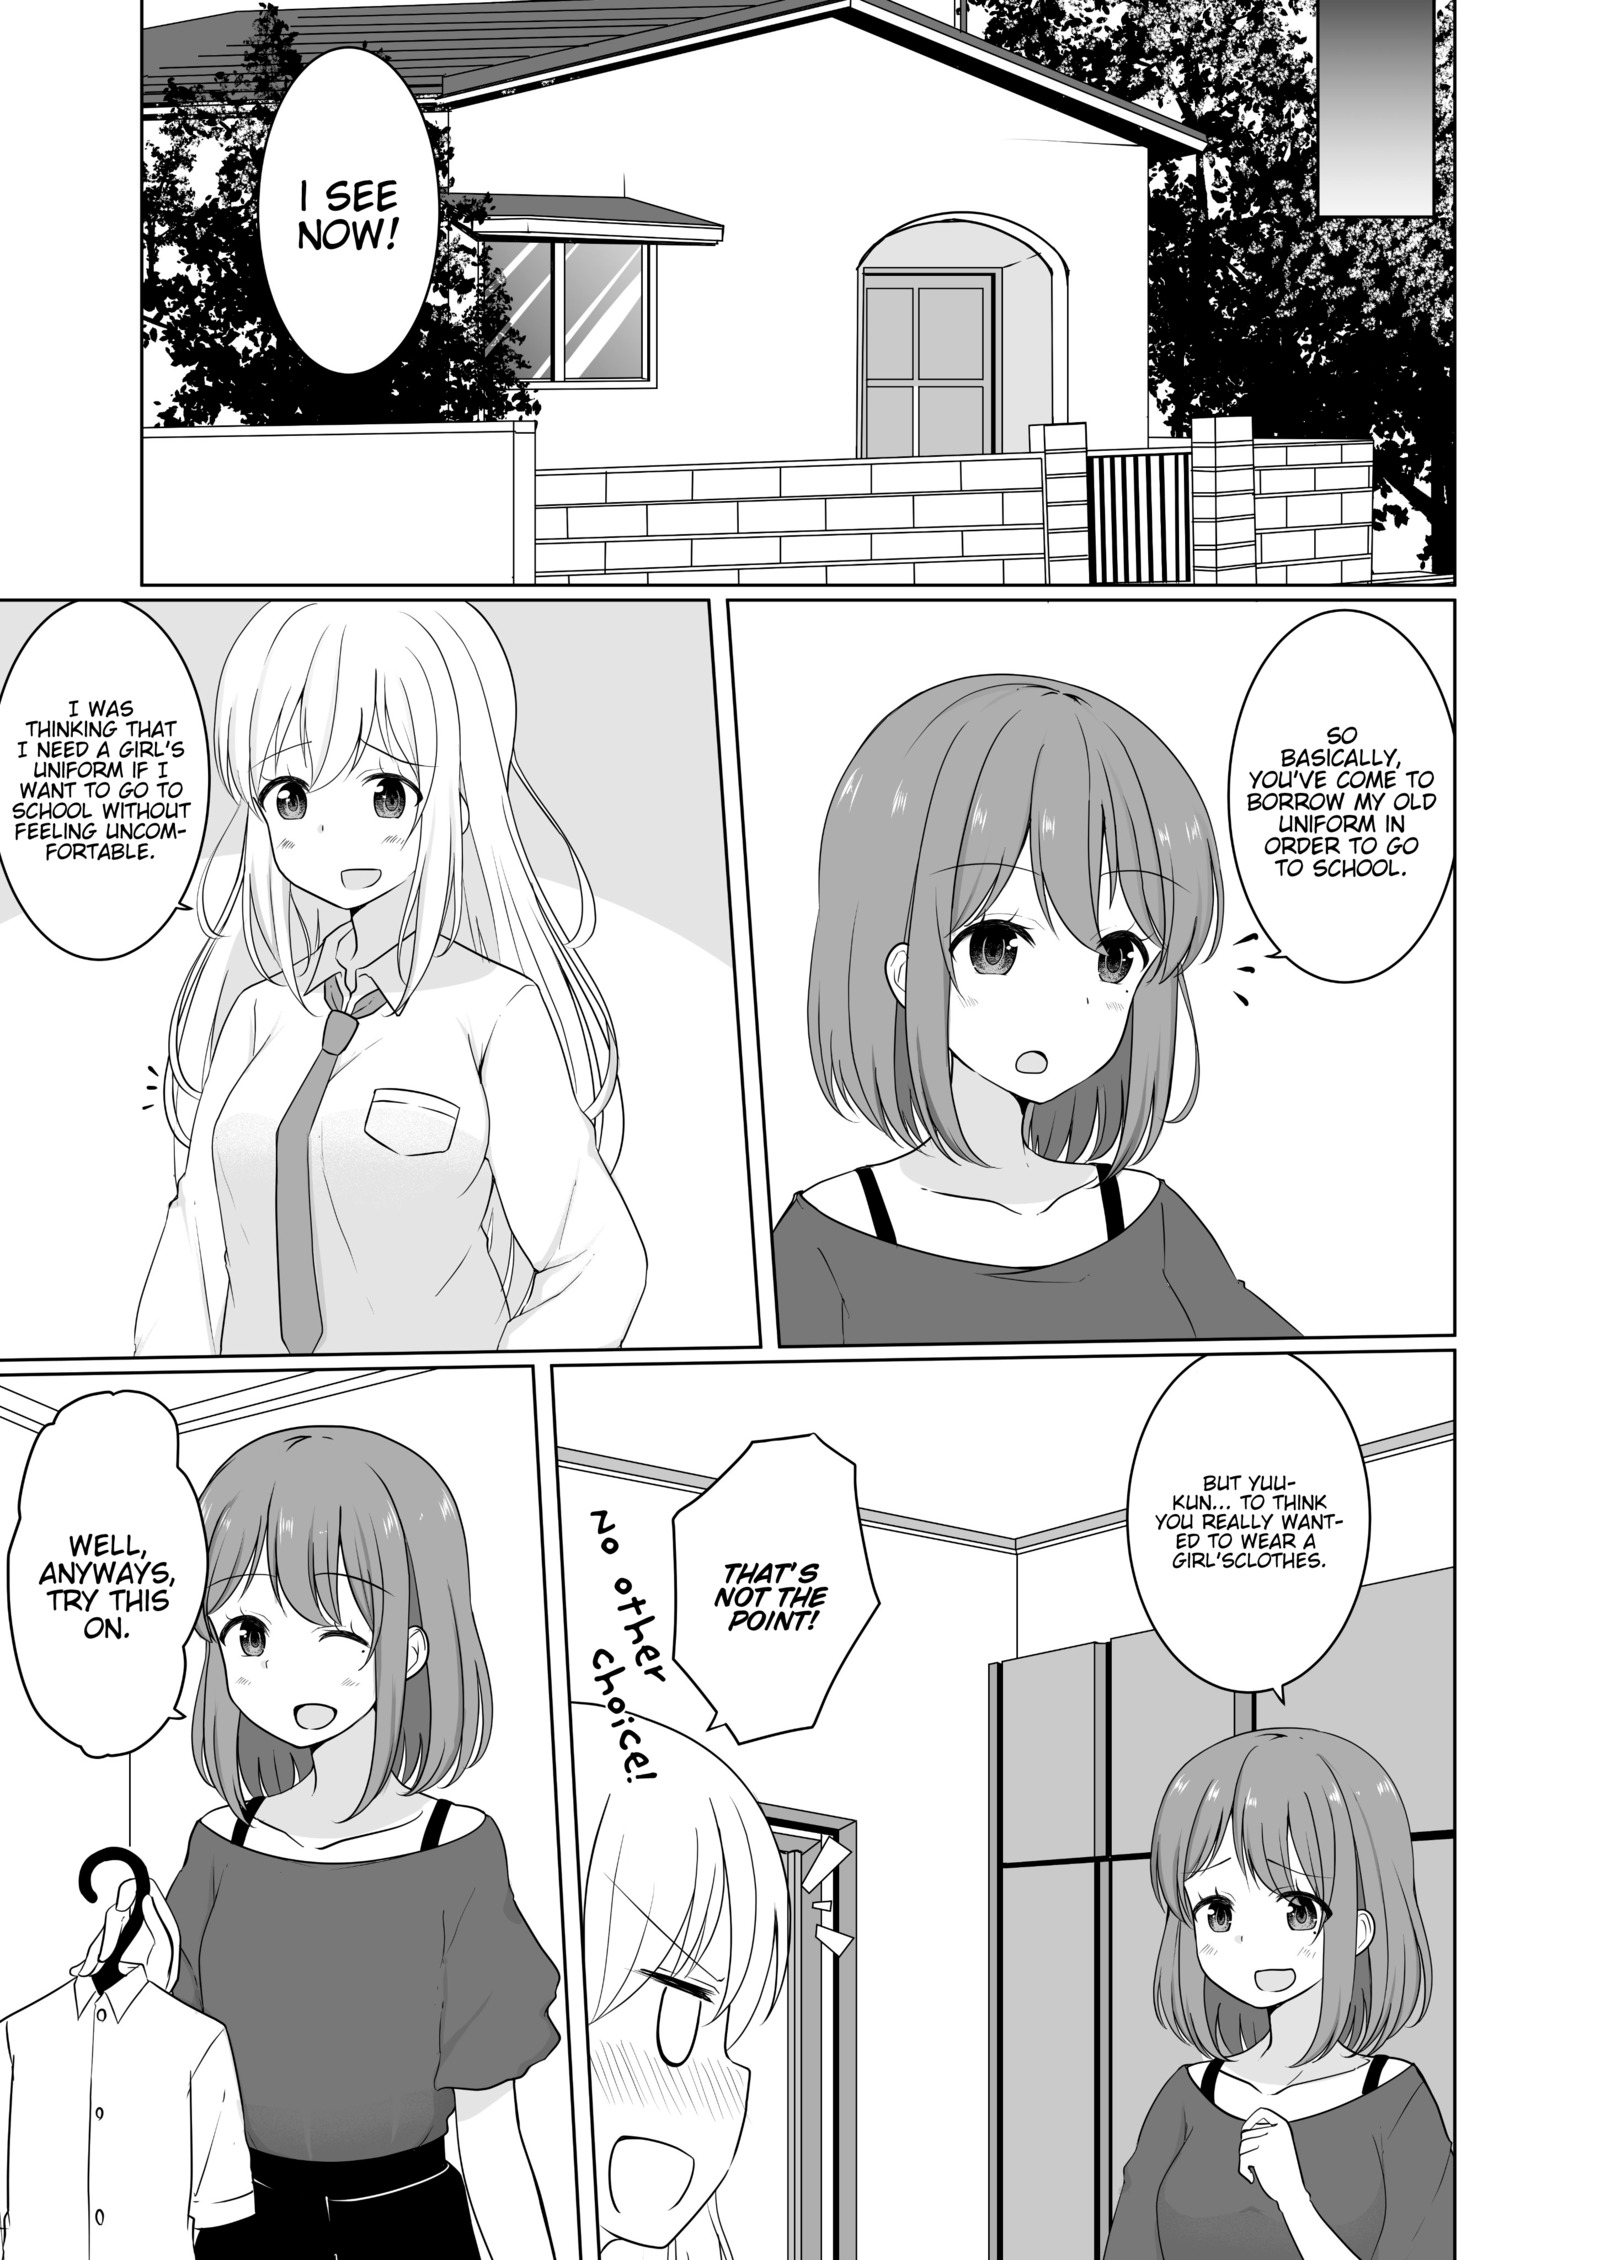 A Boy Who Loves Genderswap Got Genderswapped so He Acts out His Ideal Genderswap Girl ch.9